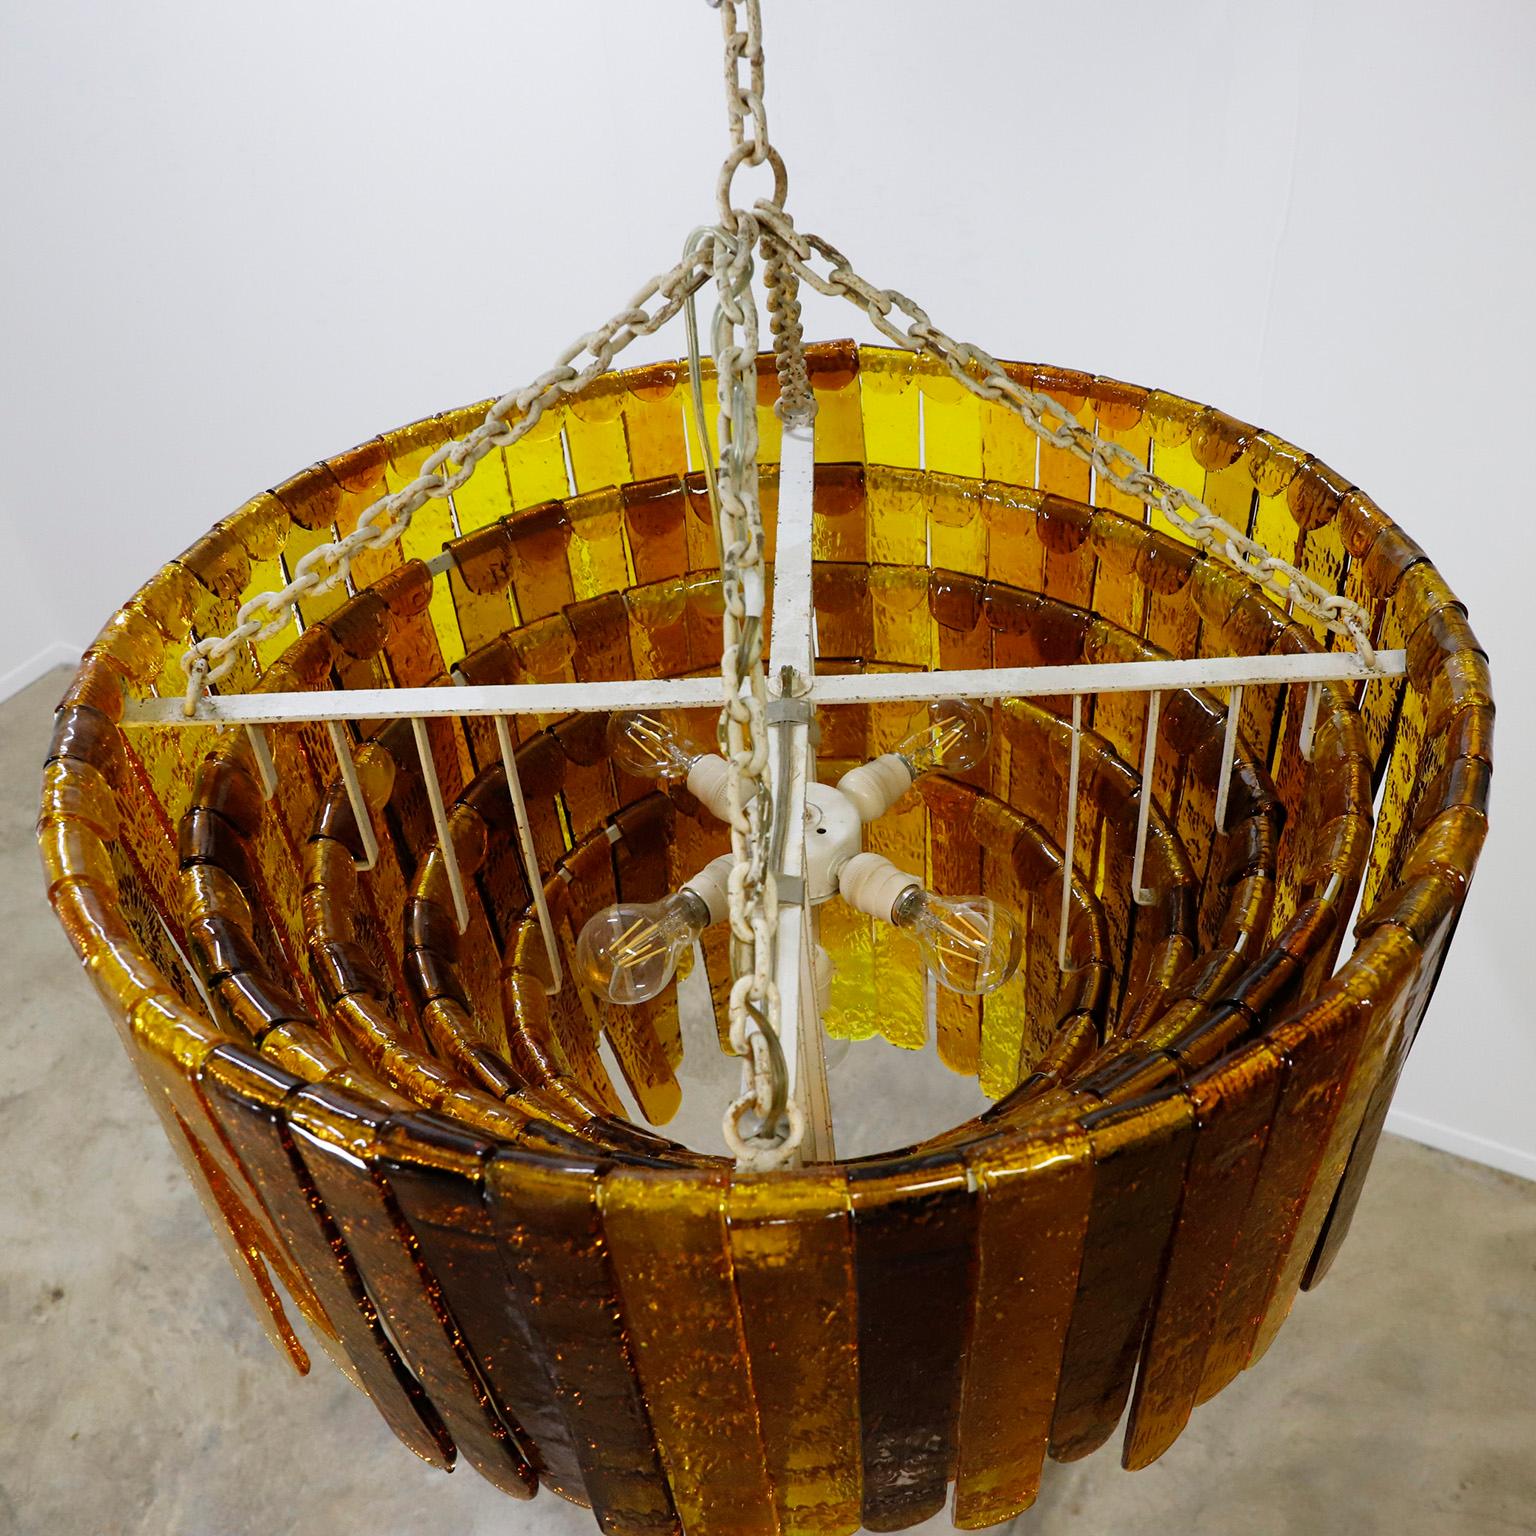 If you are looking for a huge dimensions chandelier.  We offer this unique piece made entirely by hand, designed by Felipe Delfinger for a residence in Mexico around 1970.
This masterful work  was made with 186 handmade glass blocks 34 cm long by 5